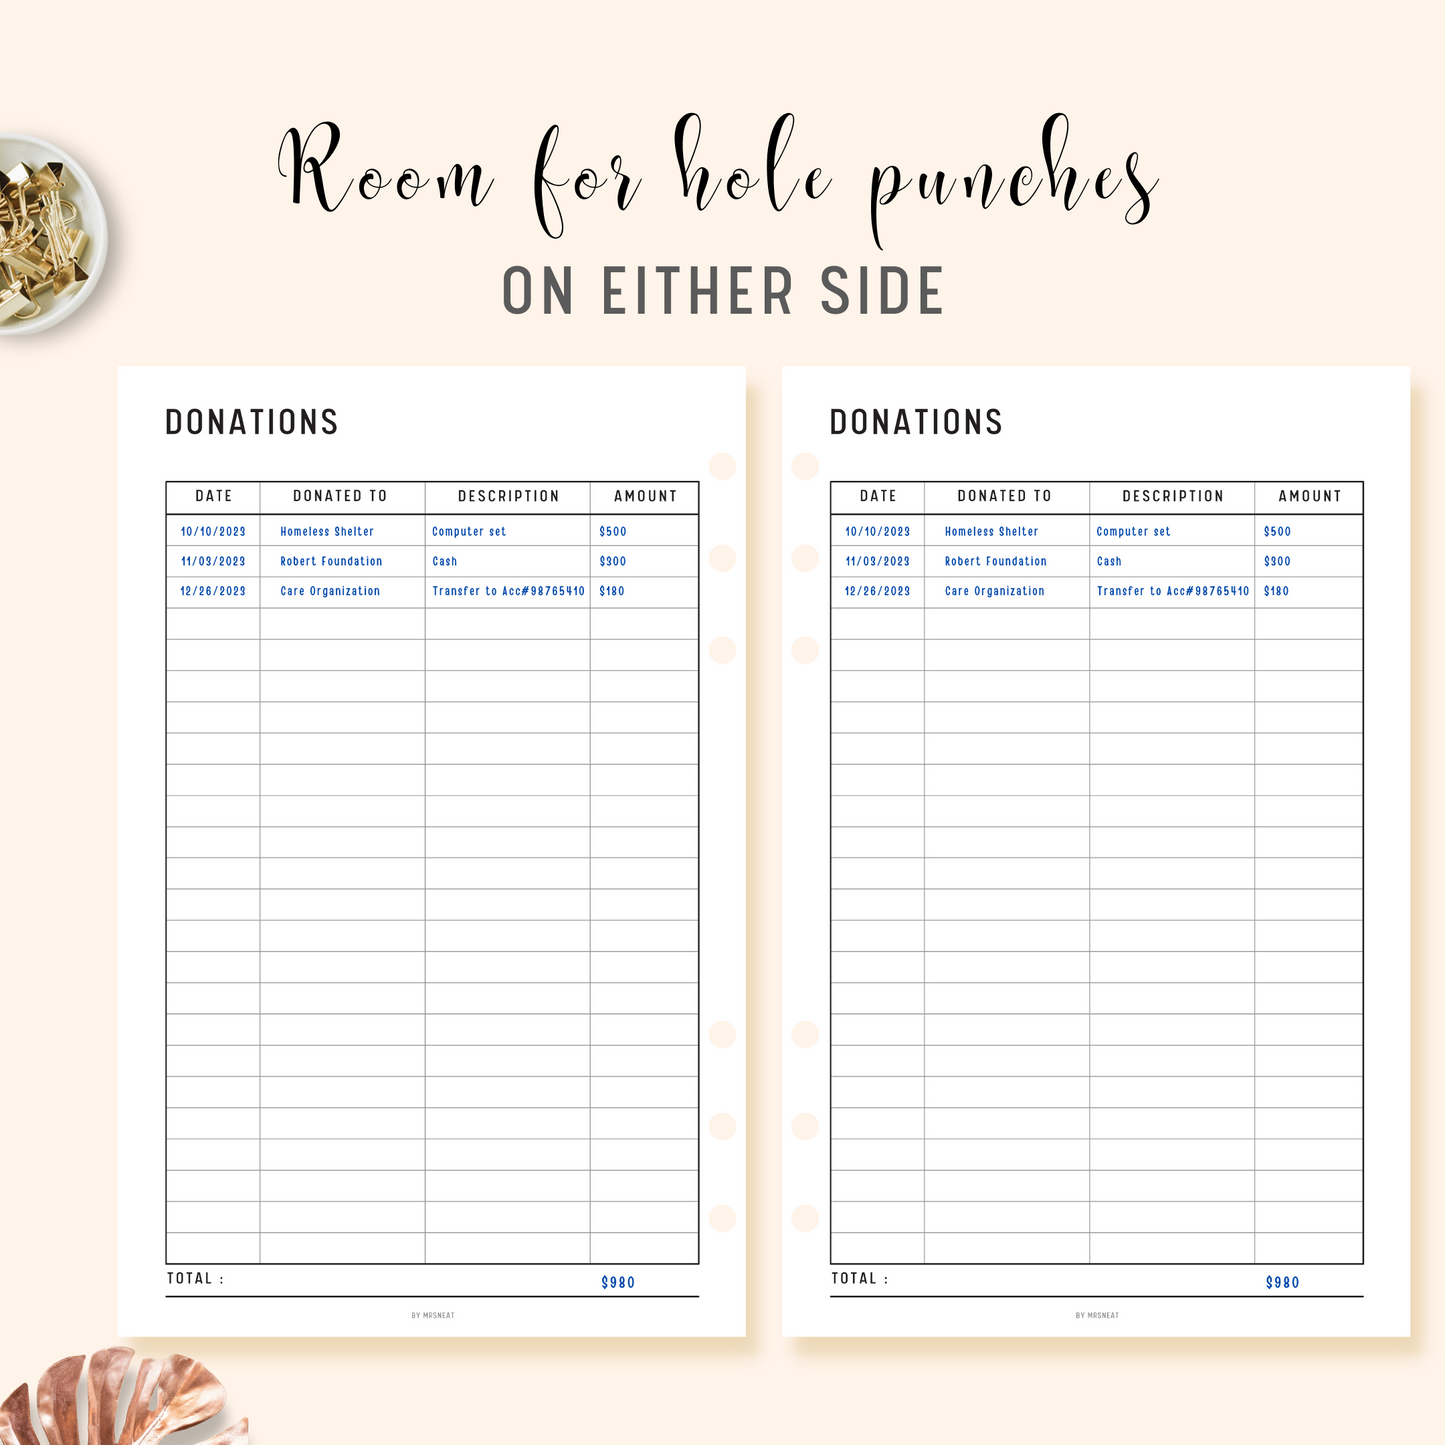 Minimalist Donation Tracker Planner Printable with room for hole punches on either side